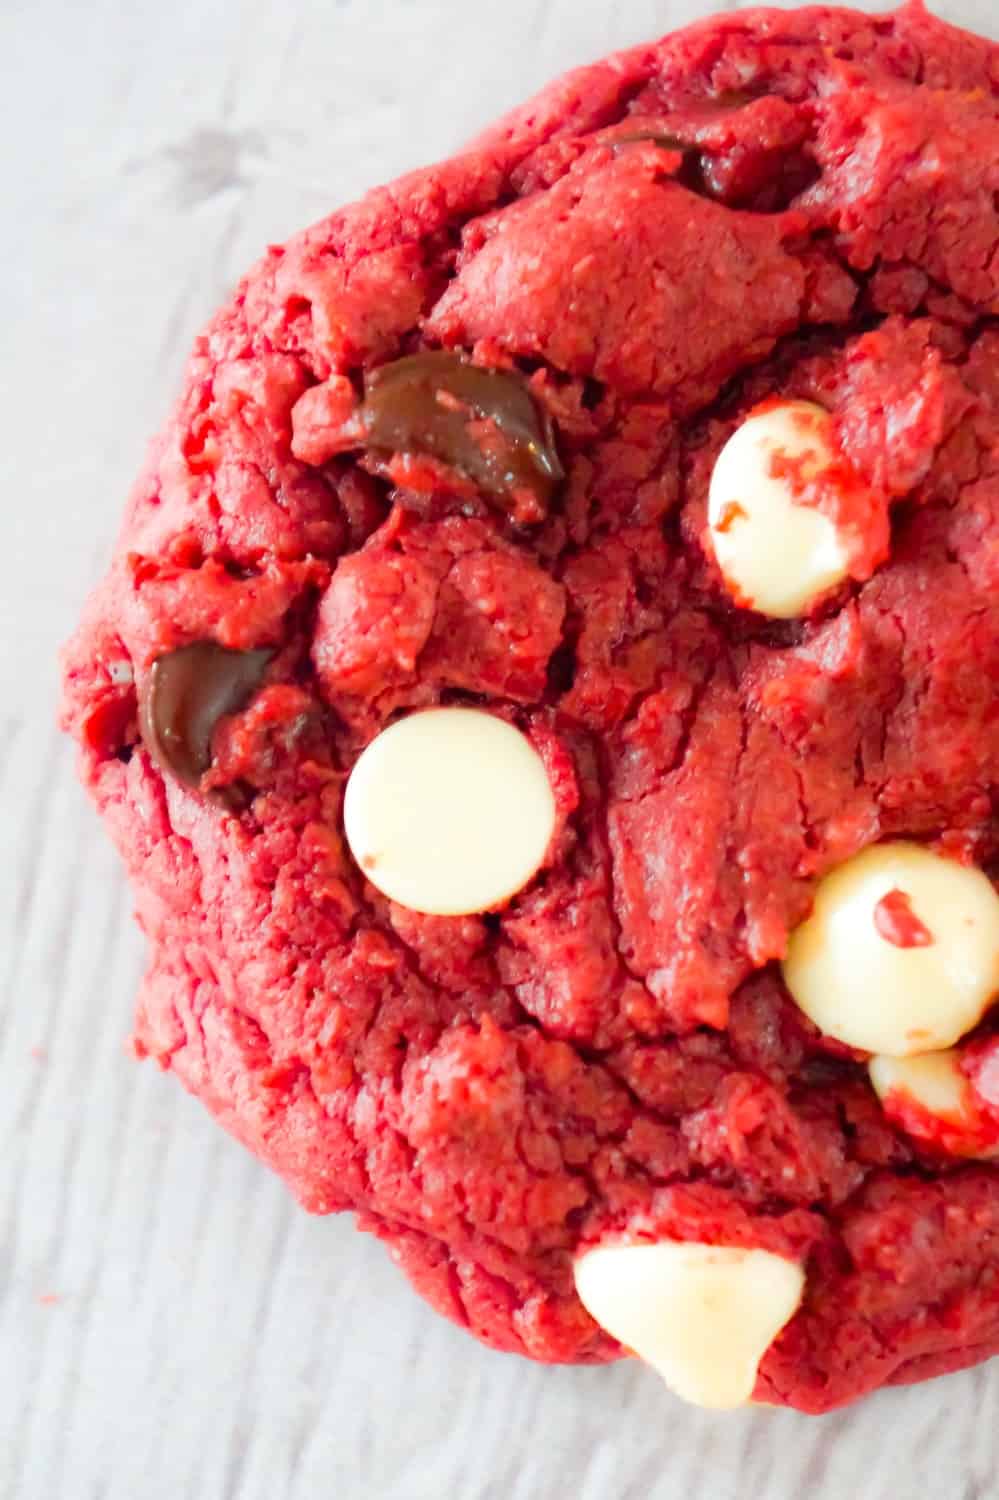 Red Velvet Cake Mix Cookies are an easy dessert recipe perfect for Valentine's day. These chewy red velvet cookies are loaded with semi-sweet and white chocolate chips.